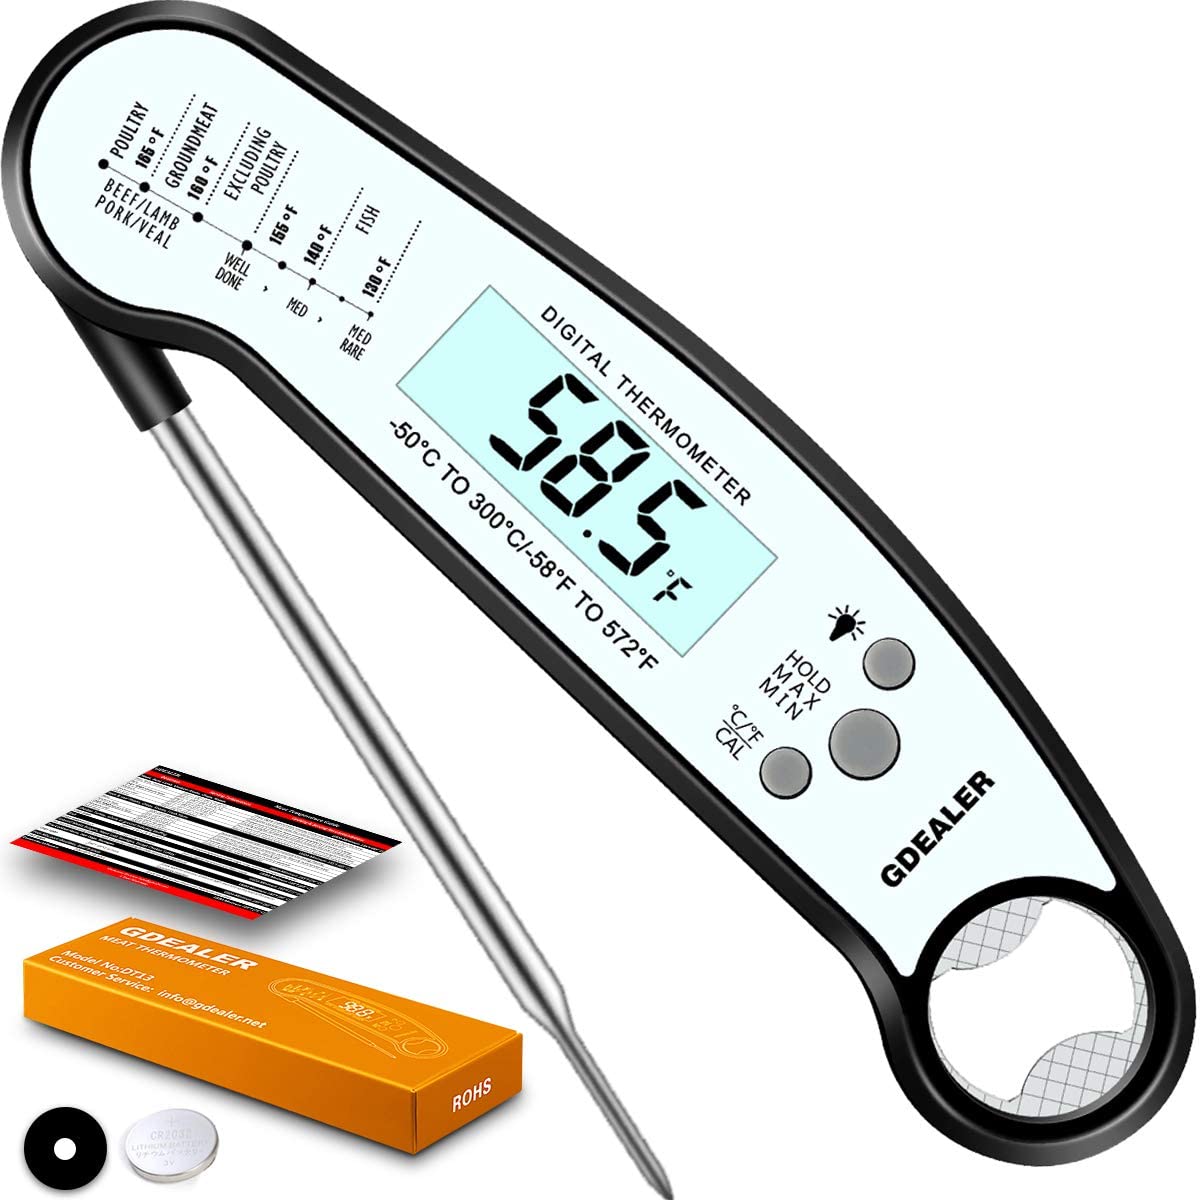 GDEALER Waterproof Digital Meat Thermometer with Bottle Opener Super Fast Instant Read Thermometer BBQ Thermometer with Calibration and Back-lit Function Cooking Thermometer for Meat Kitchen Candy